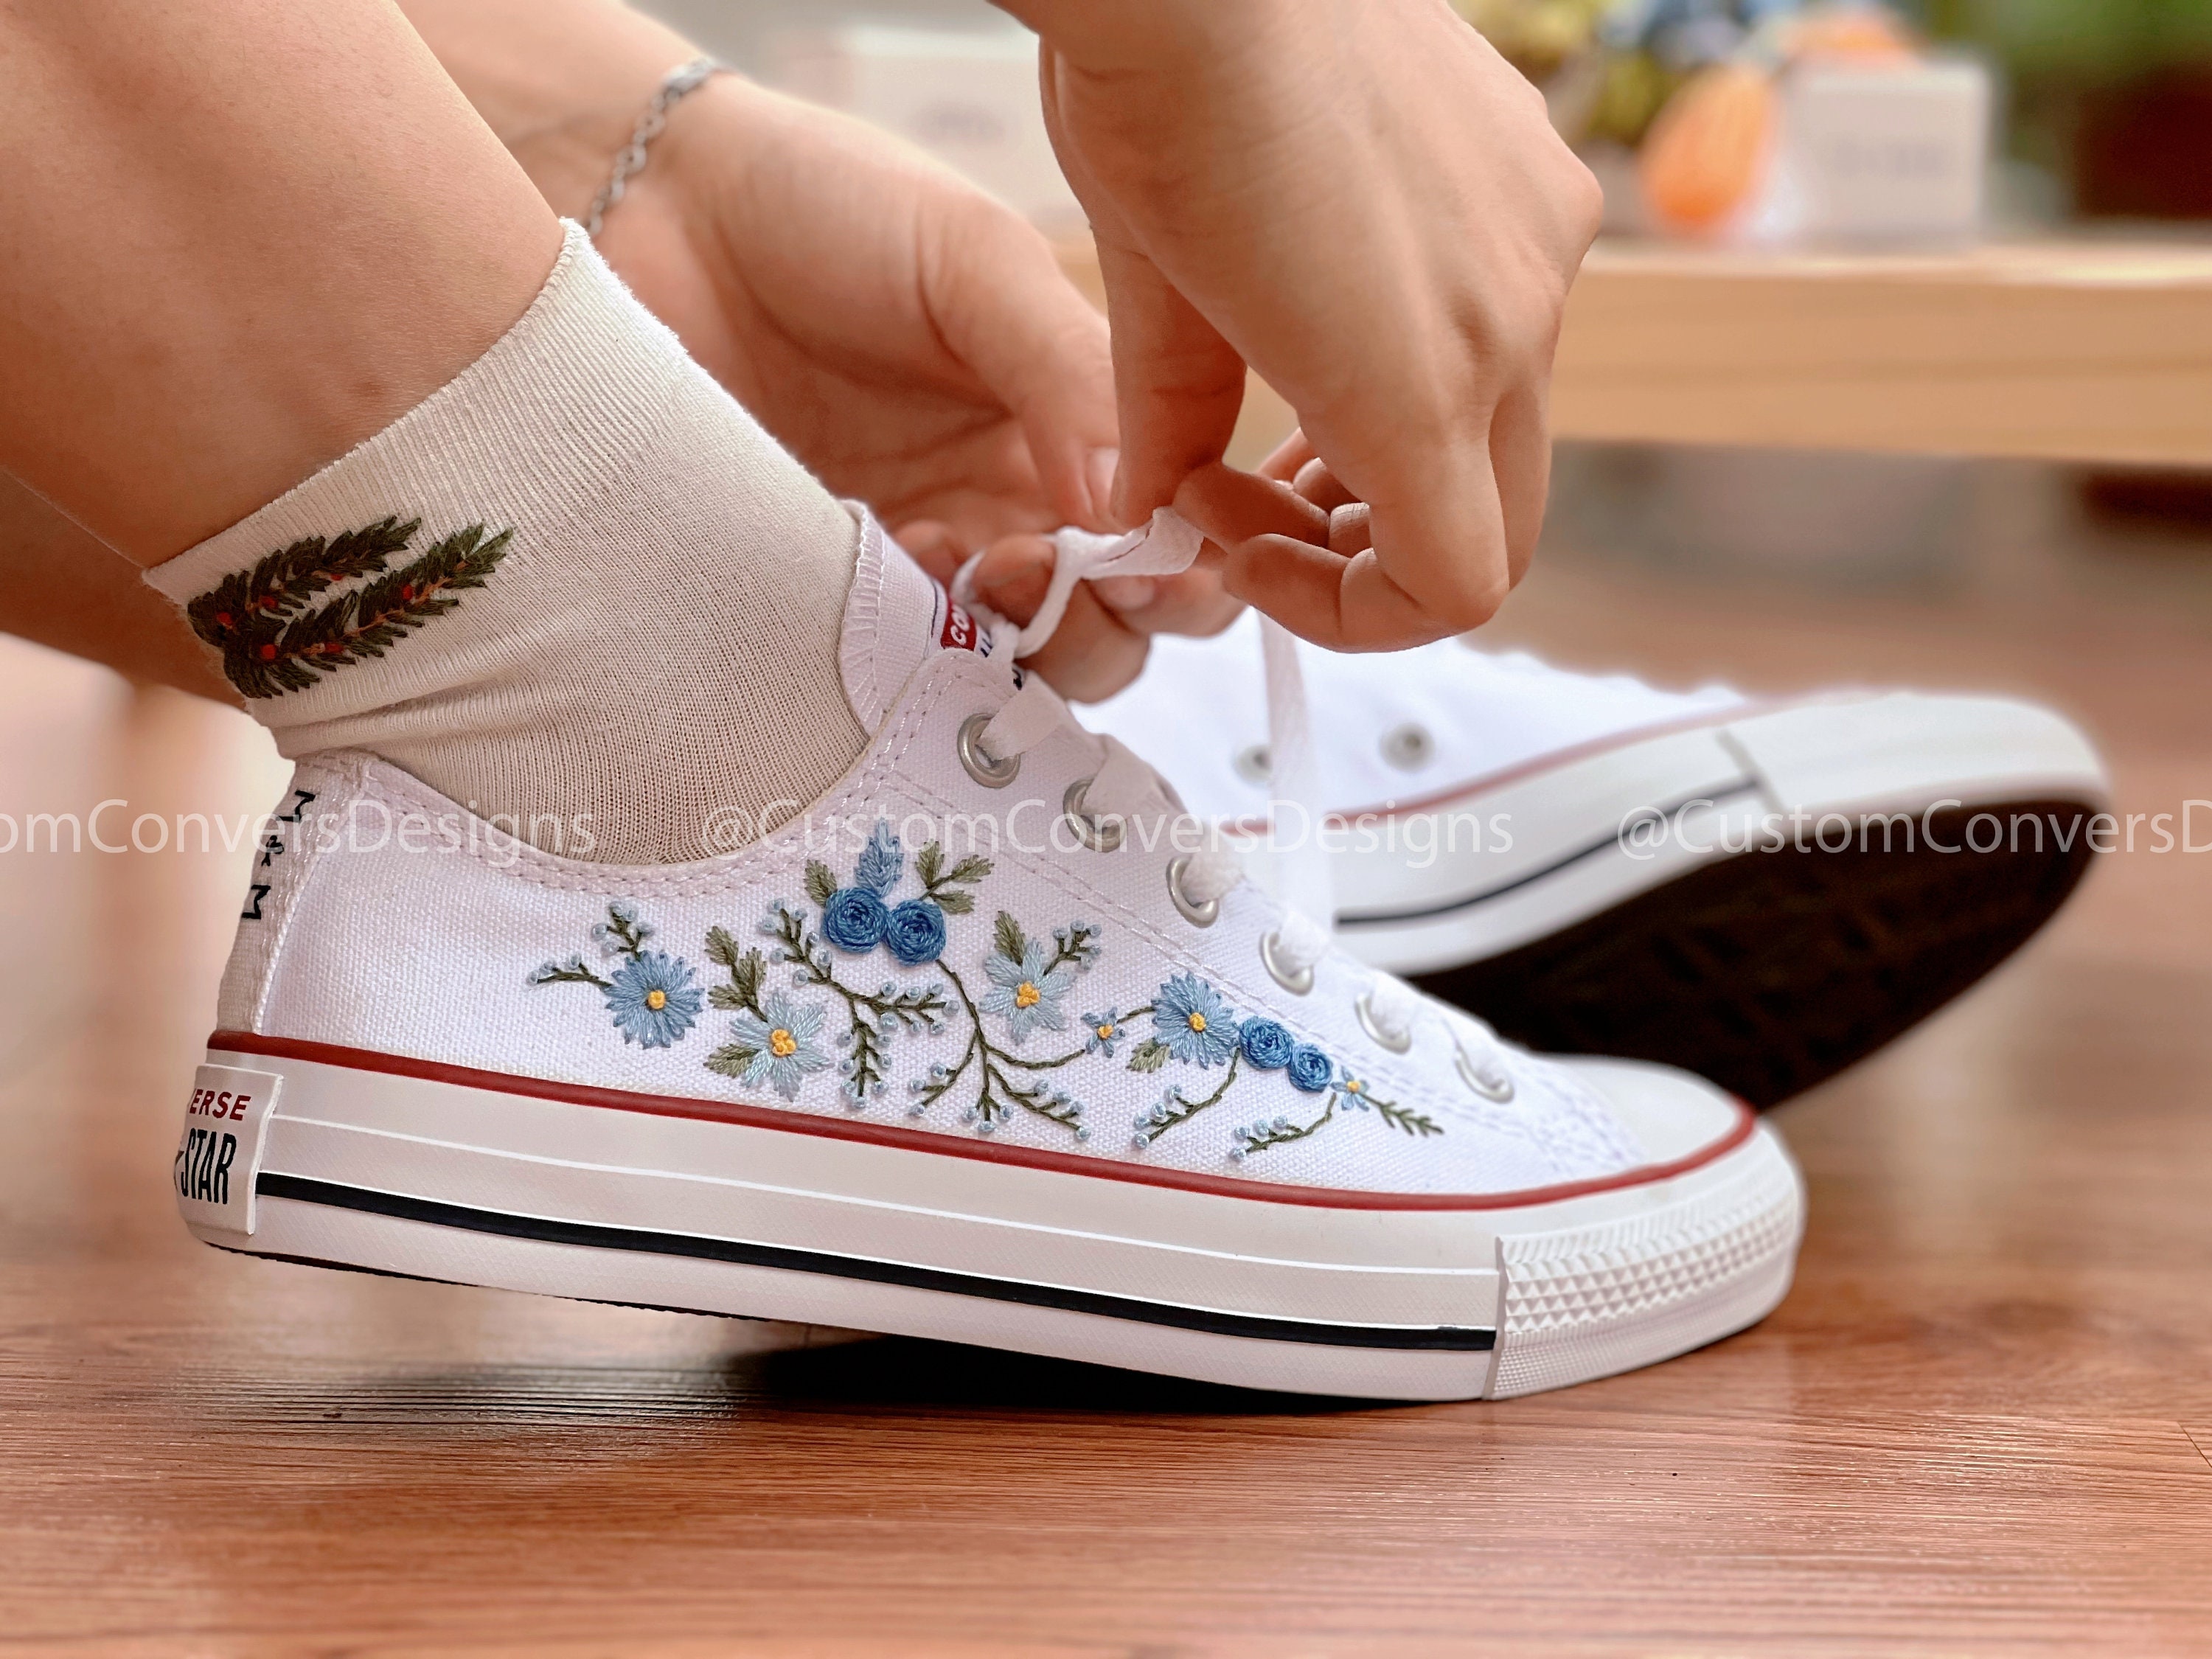 Leia for mig at lege Blue Floral Converse - Etsy UK